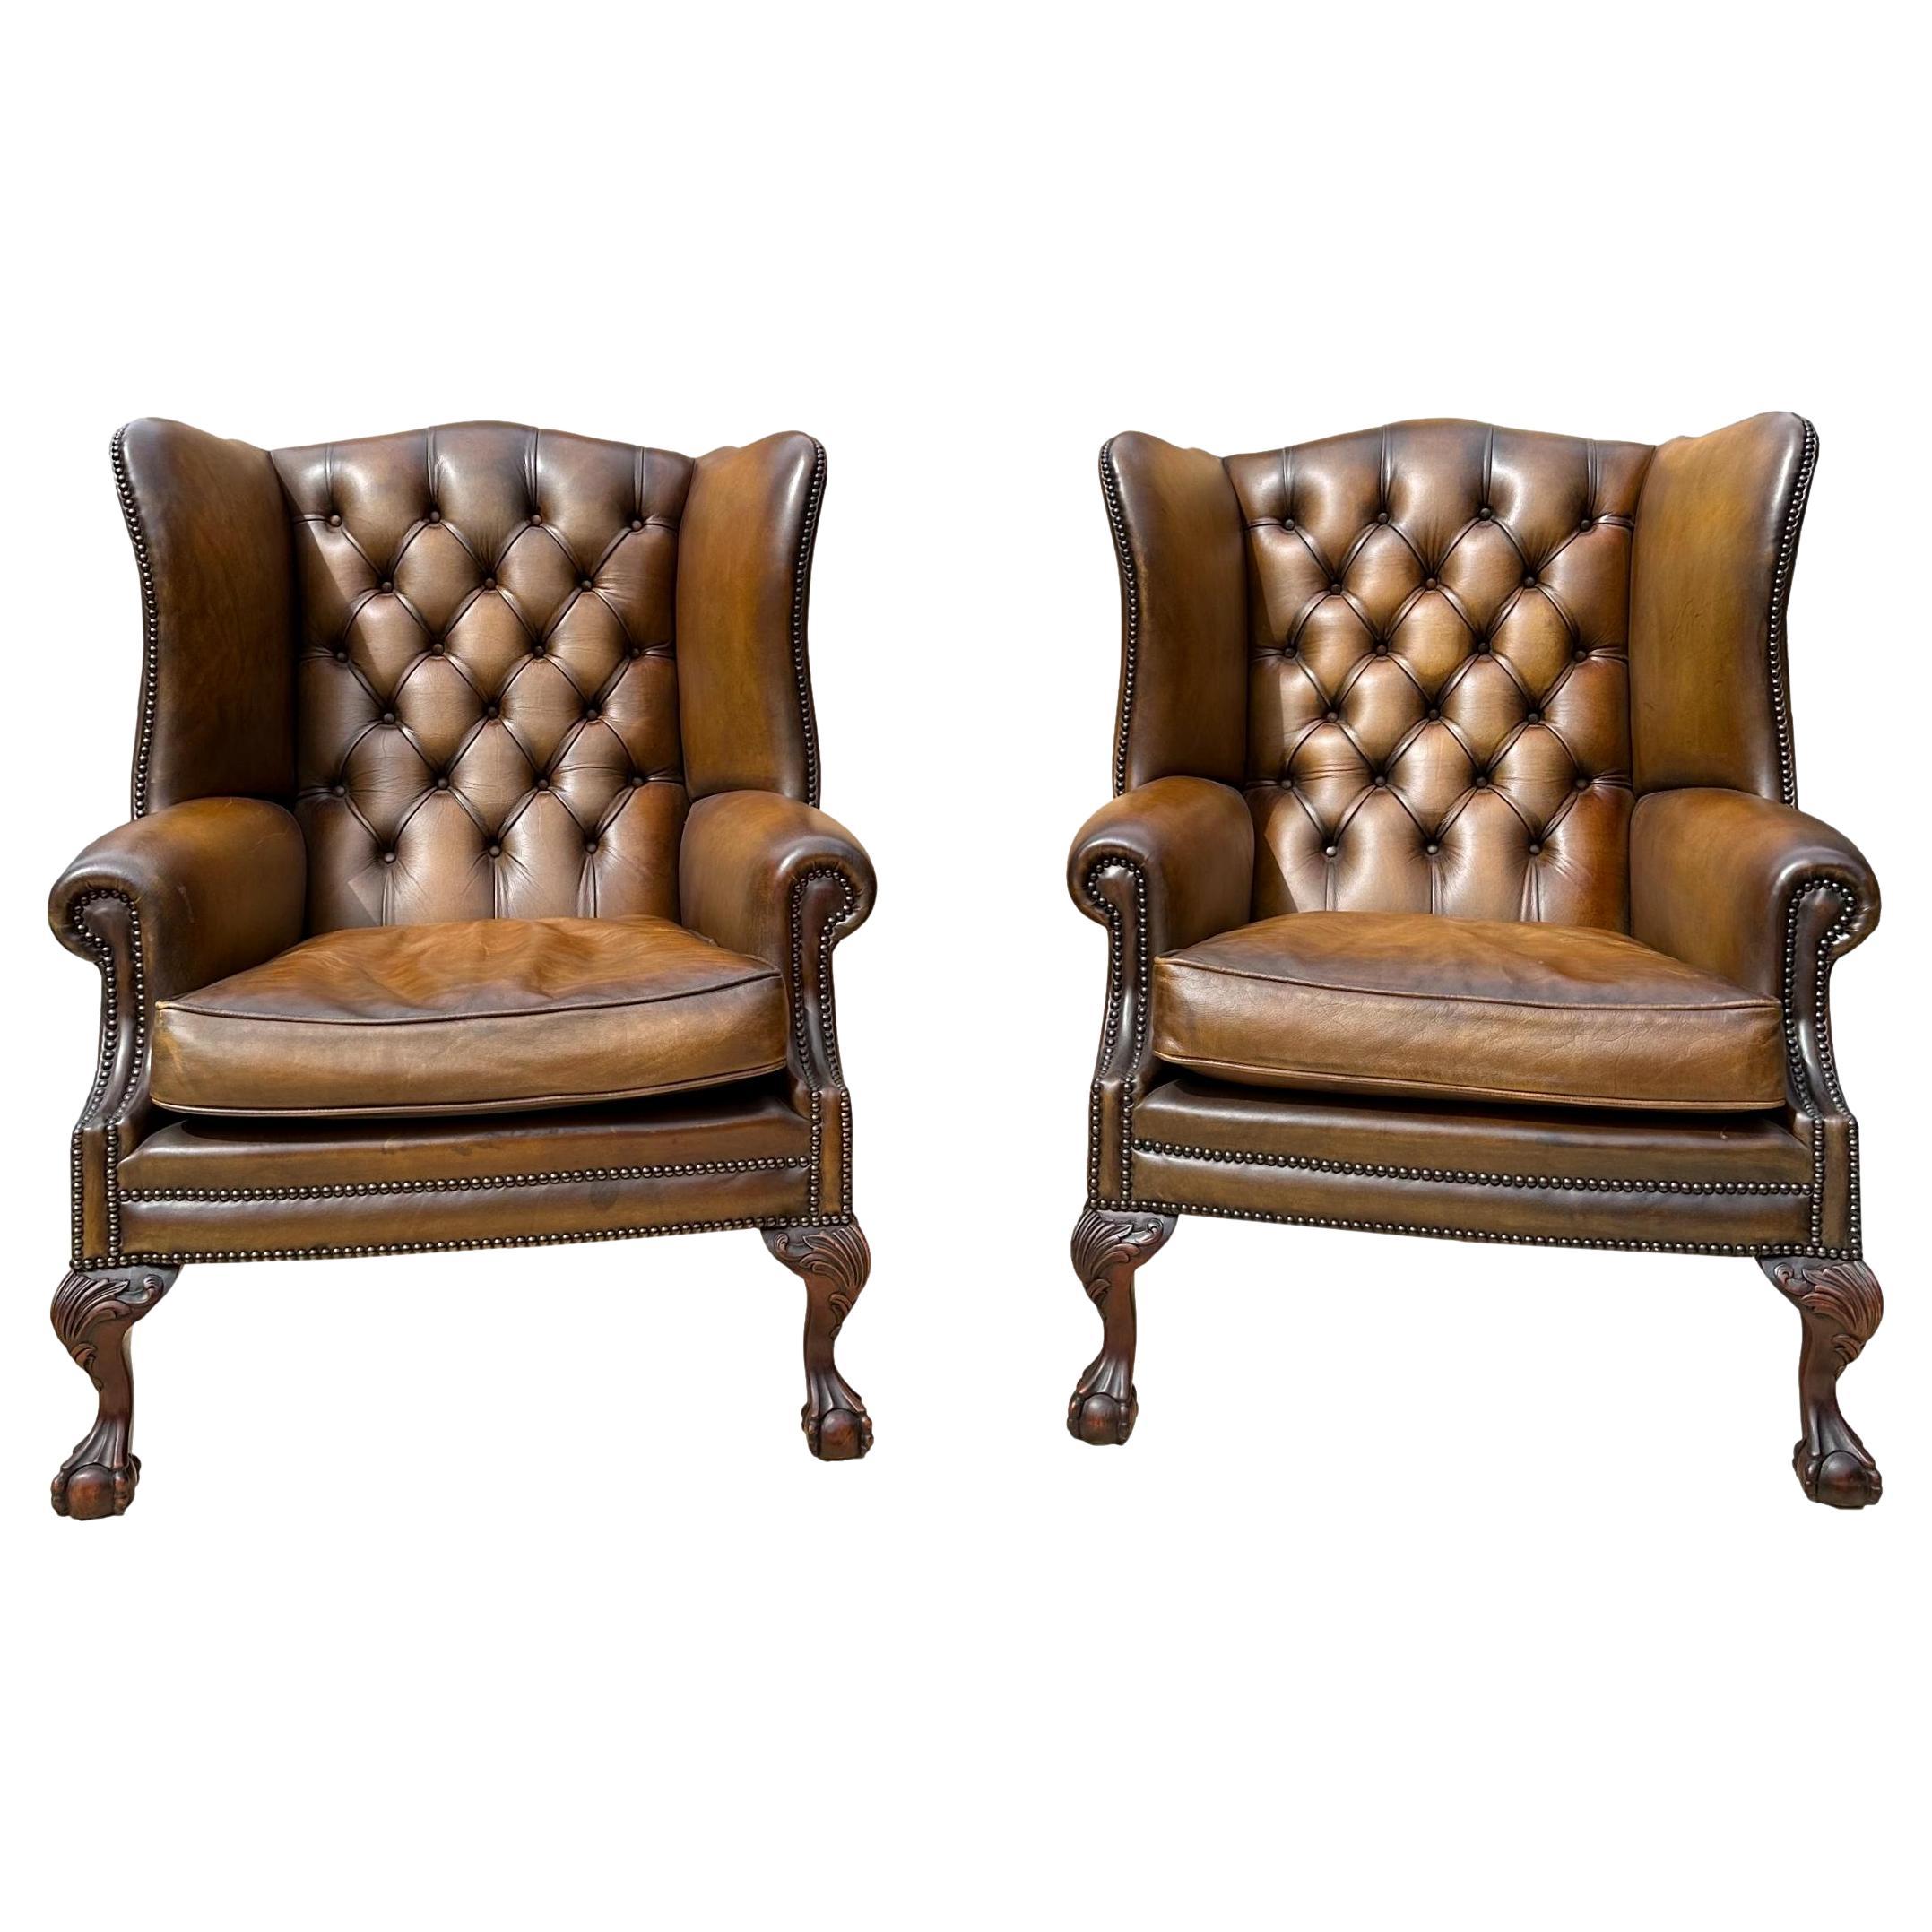 Pair of Leather Wing Back Tufted Chairs on Ball & Claw Feet, English, ca. 1920.